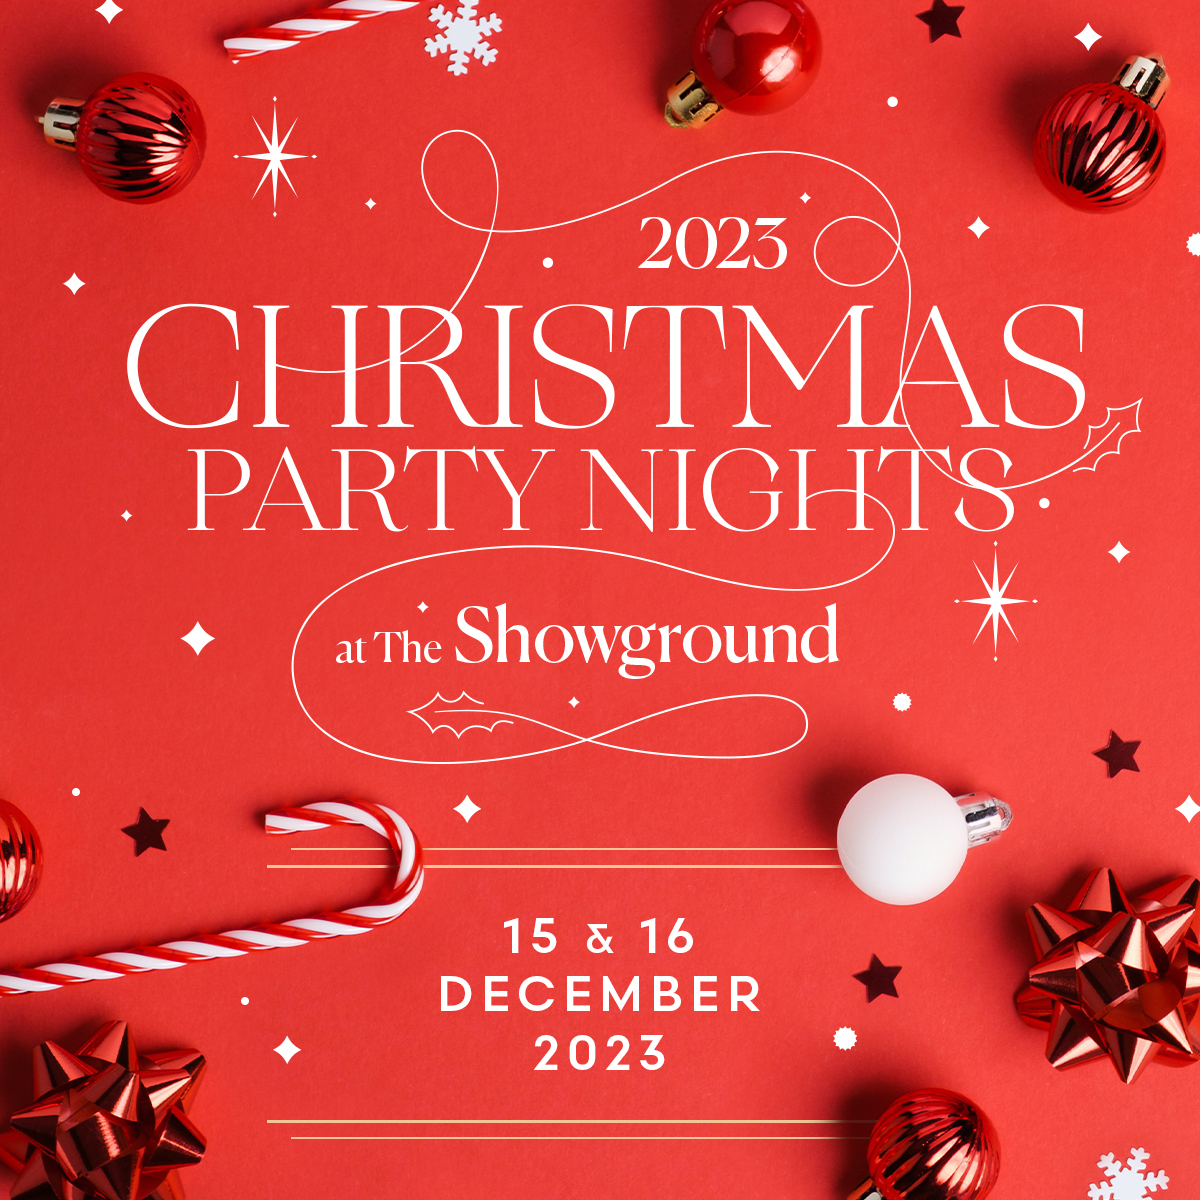 Christmas Party Nights at the Showground Fri 15 Sat 16 Dec